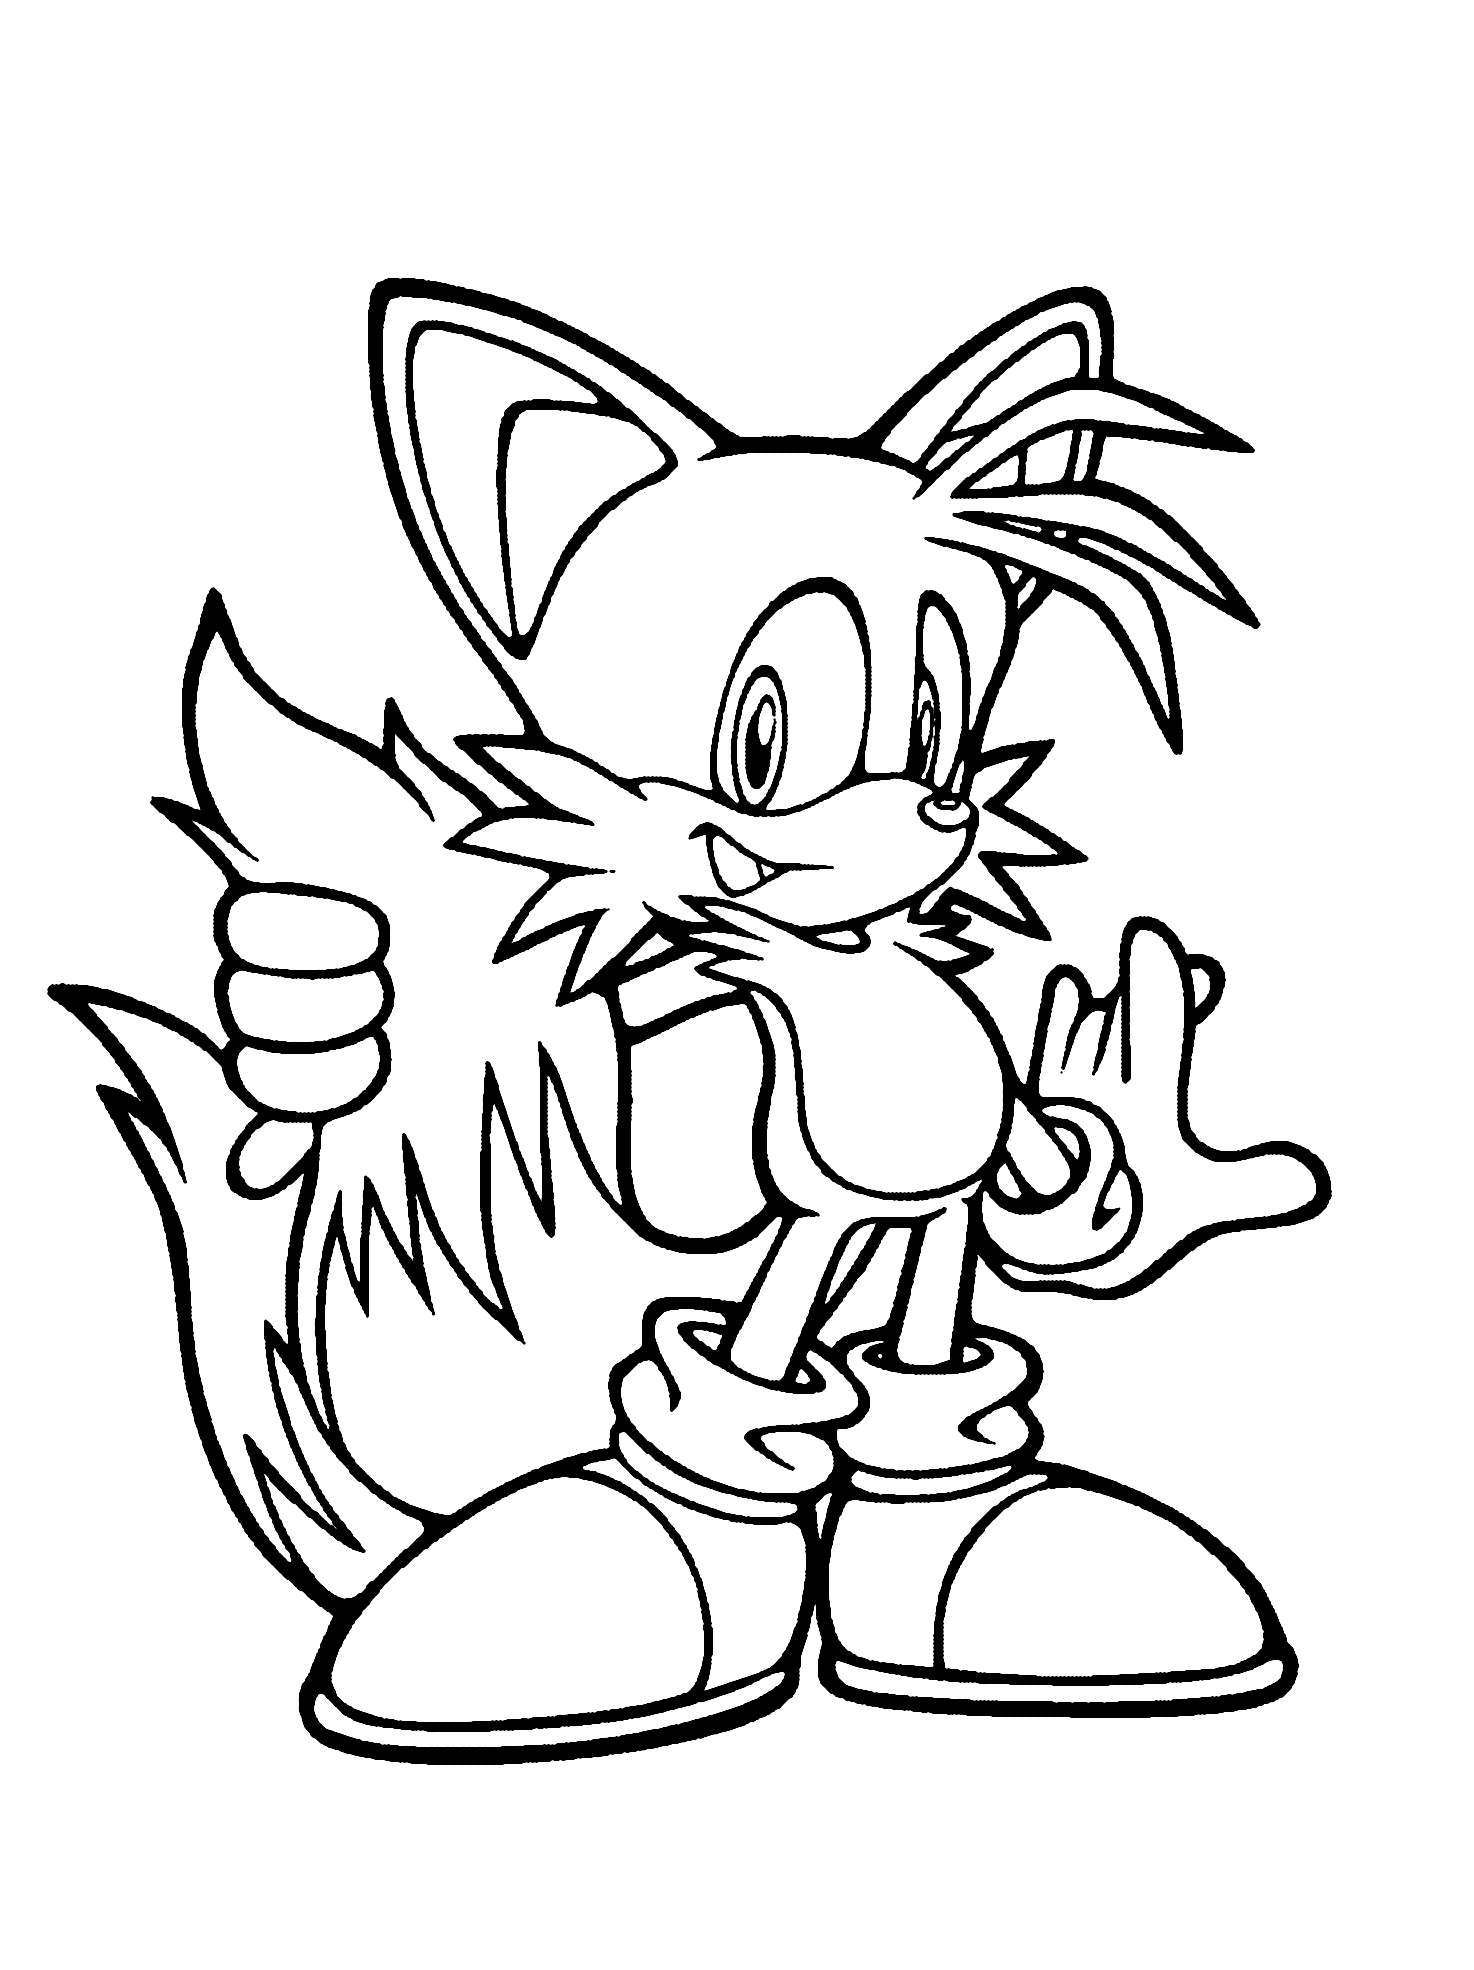 sonic and tails coloring pages dd classic sonic and tails bw by adamis on deviantart pages sonic tails coloring and 